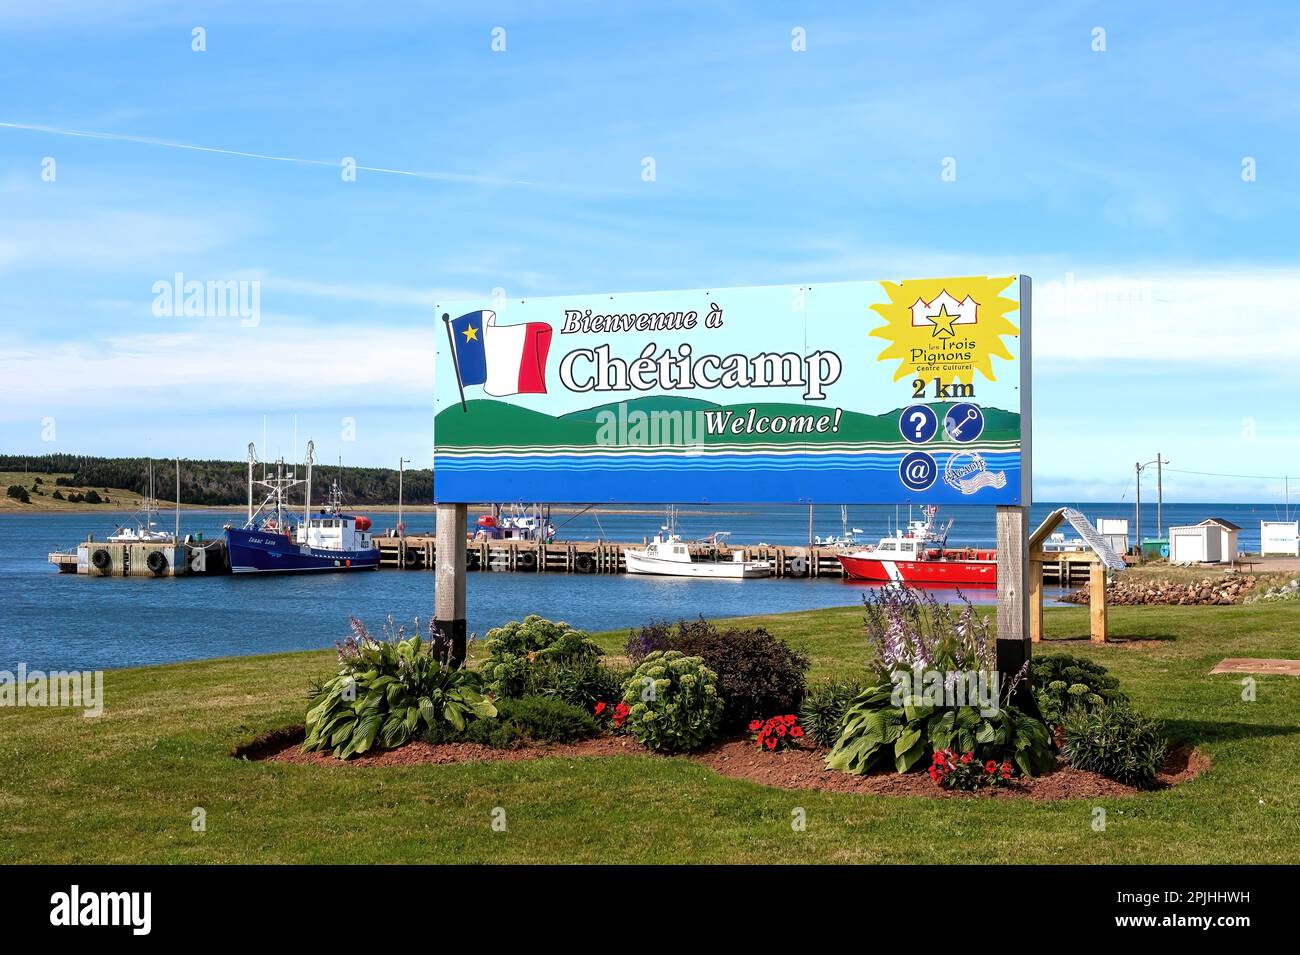 Cheticamp, Canada - August 3, 2011: Sign welcoming people to Cheticamp on the Cabot Trail of Cape Breton, Nova Scotia. The fishing village is mainly p Stock Photo